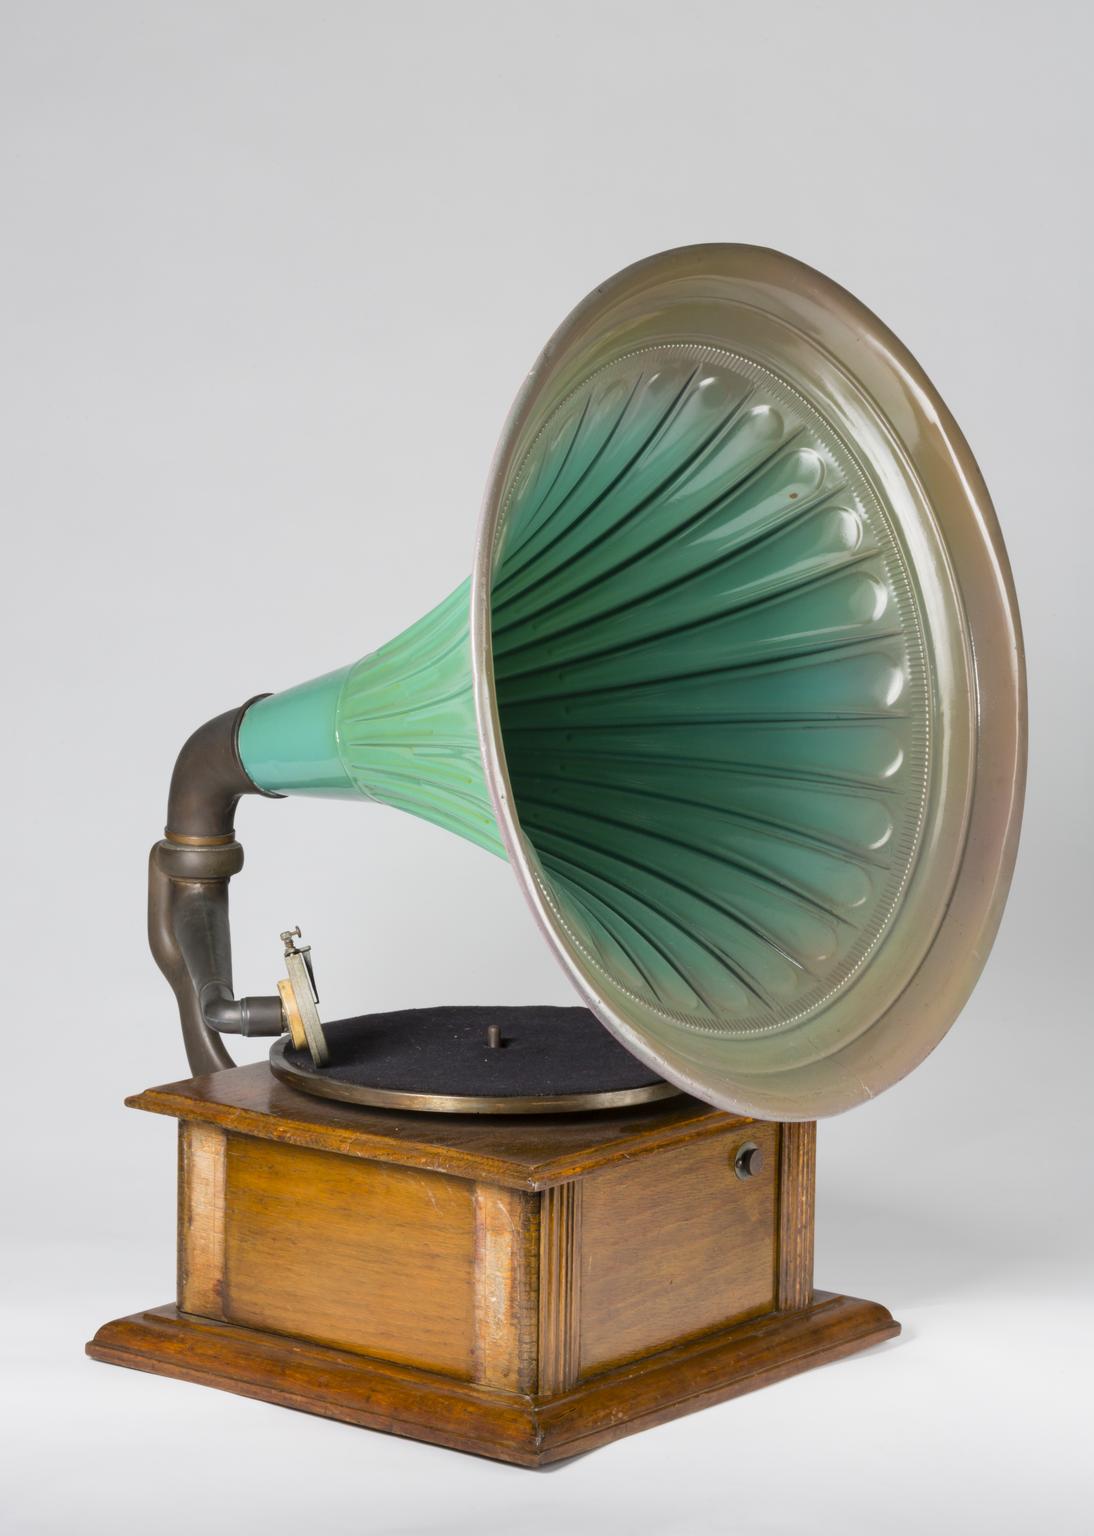 Parlophone gramophone with wooden base and turquoise horn